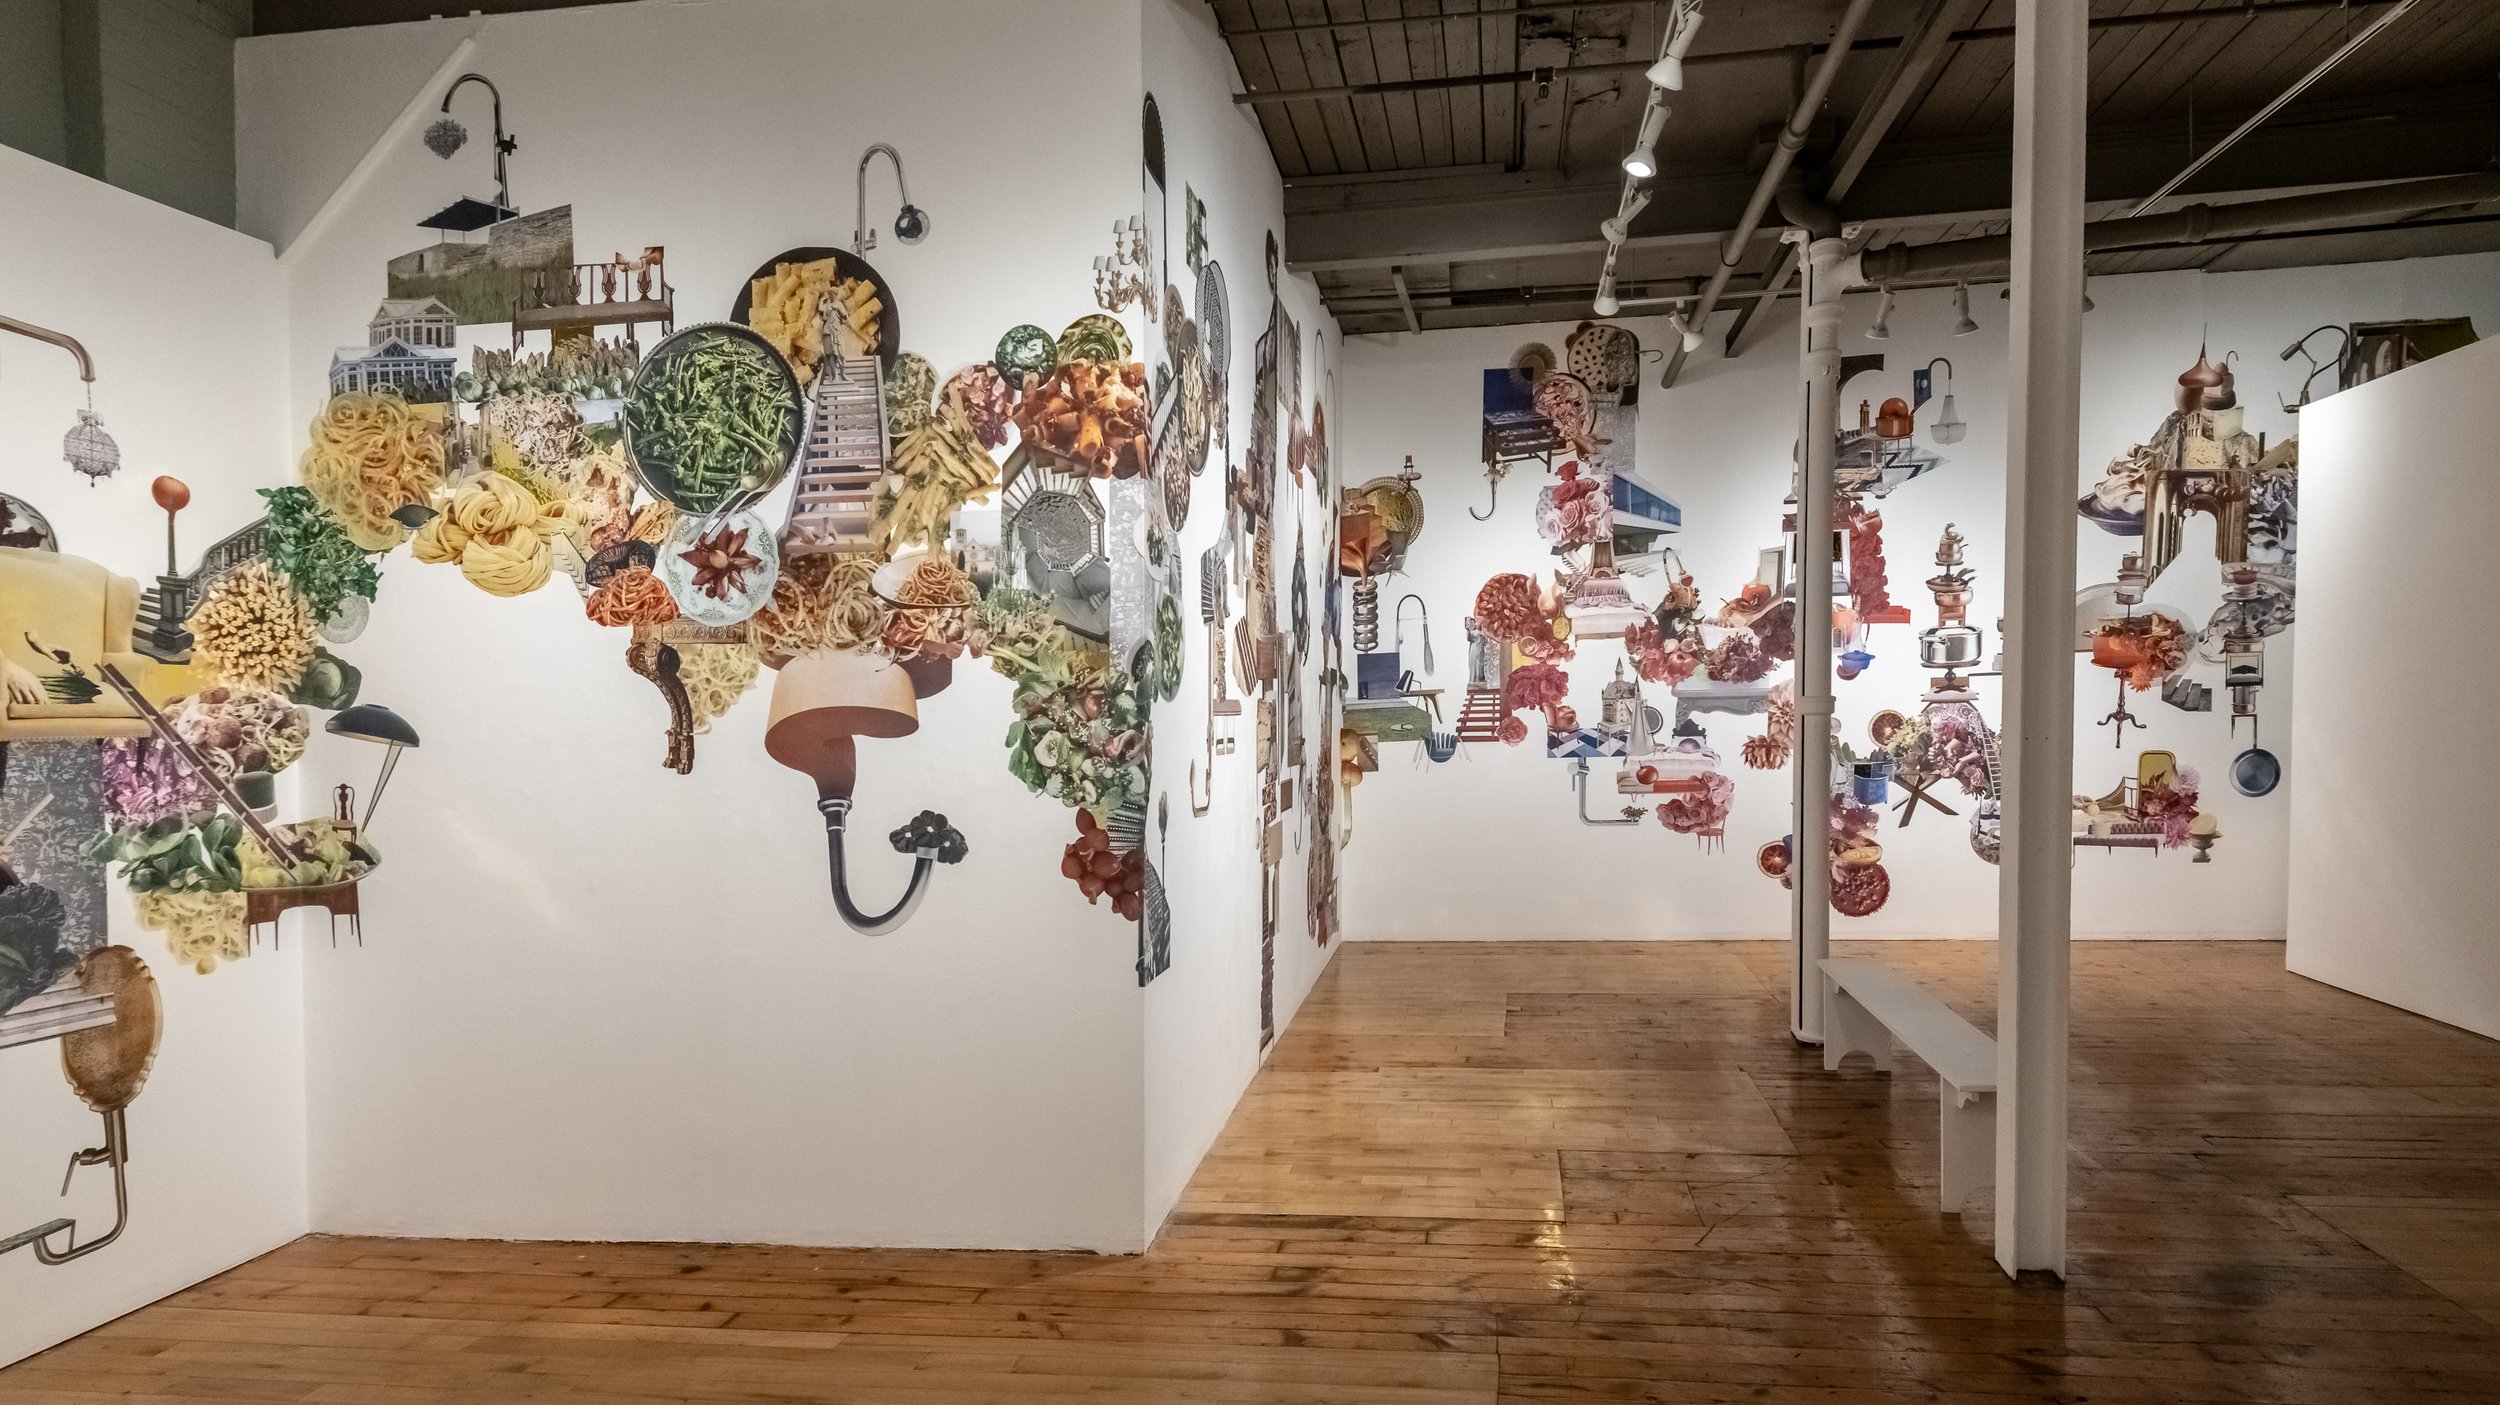  Gorge, 2019 Installation view at Red Head Gallery Hand cut collage and mixed media  Picture by Peggy Taylor Reid, 2019 